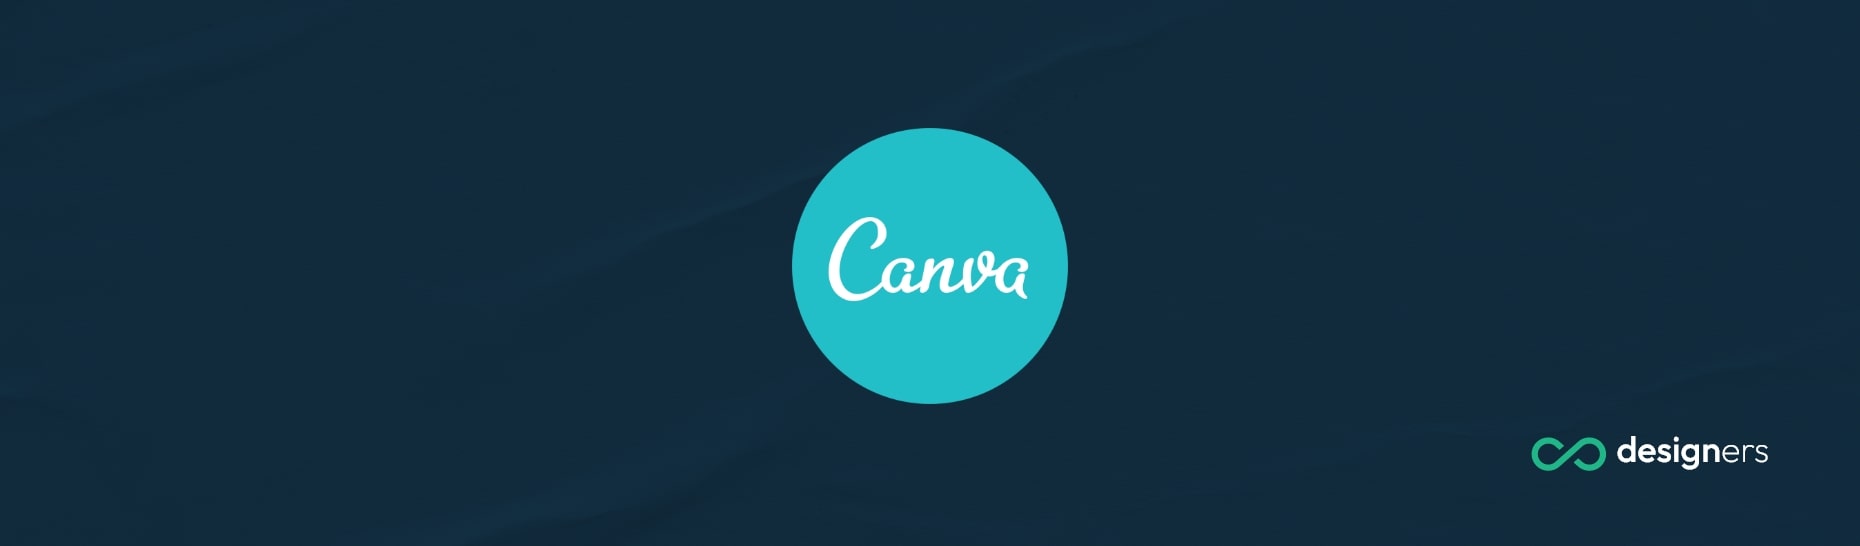 Is There an Eyedropper Tool in Canva?